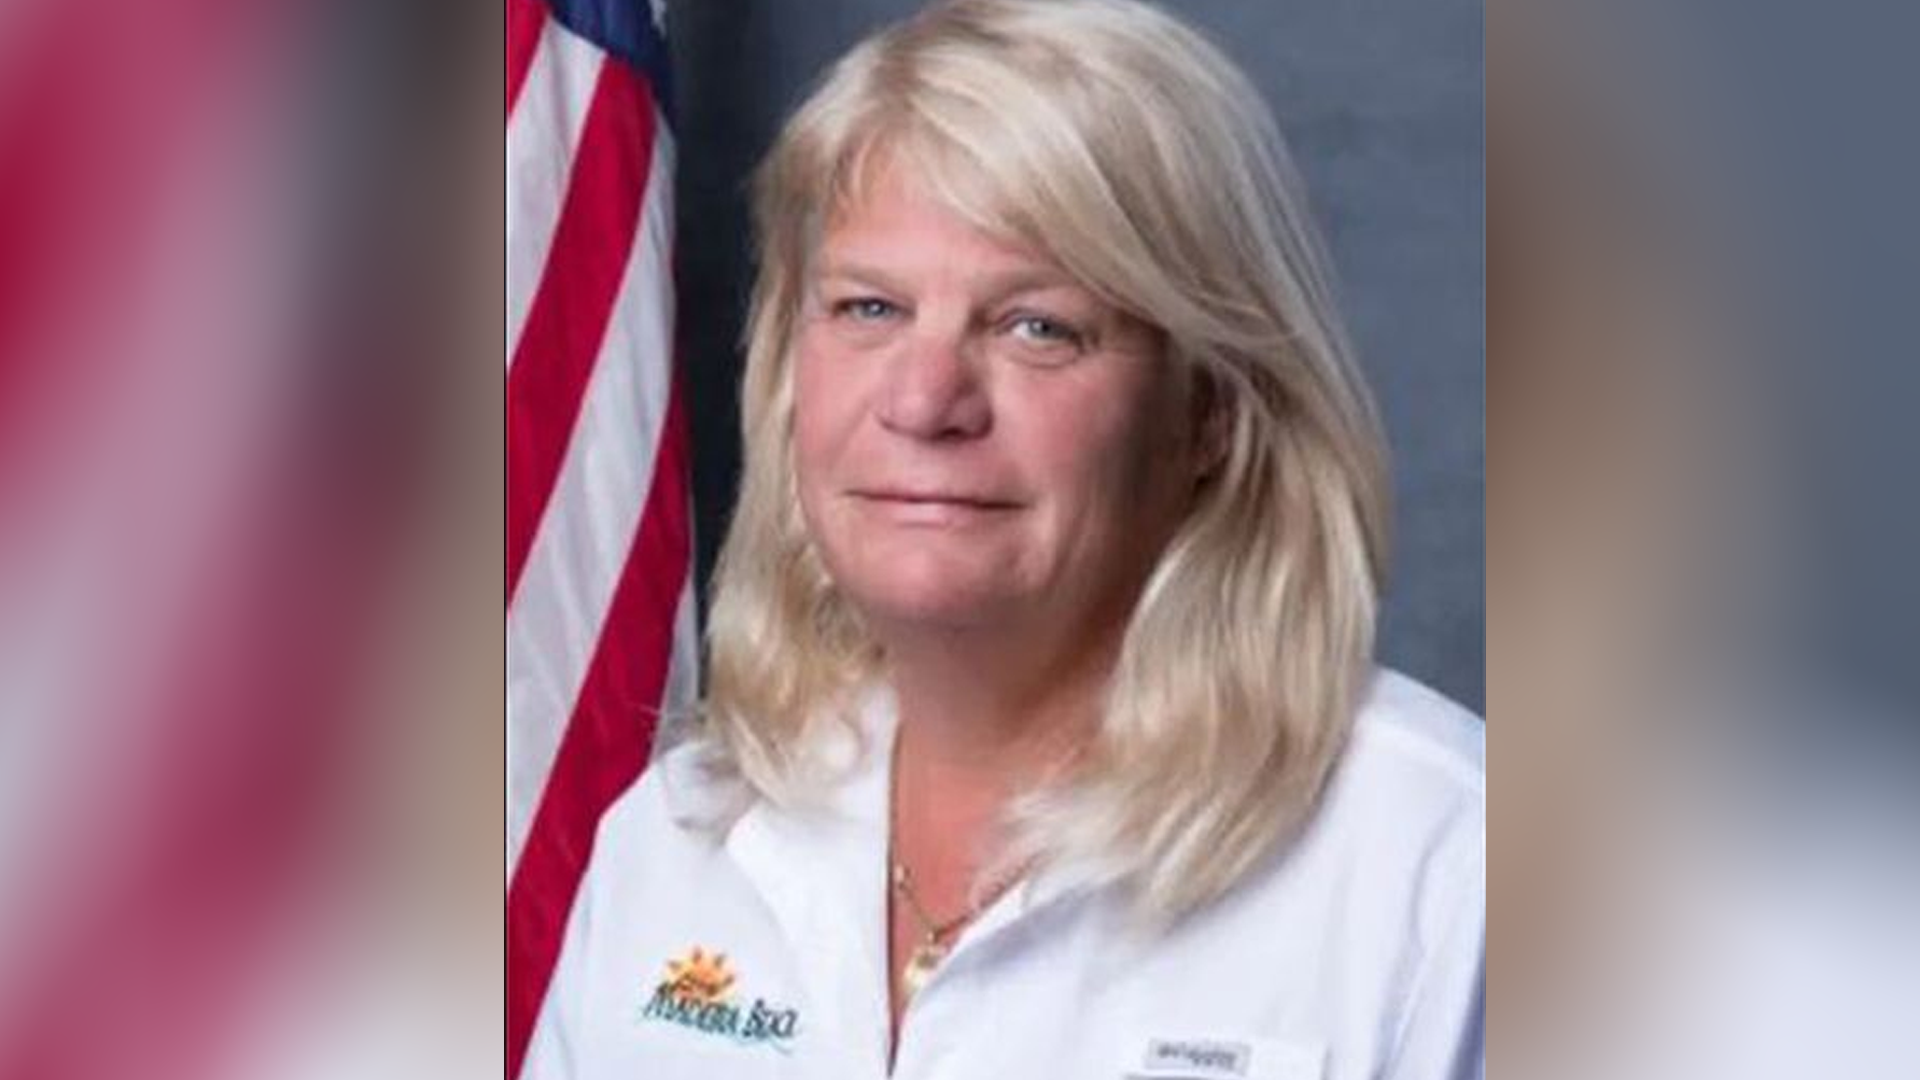 Florida Politician Resigns Over Face-Licking Allegations - Thumbnail Image